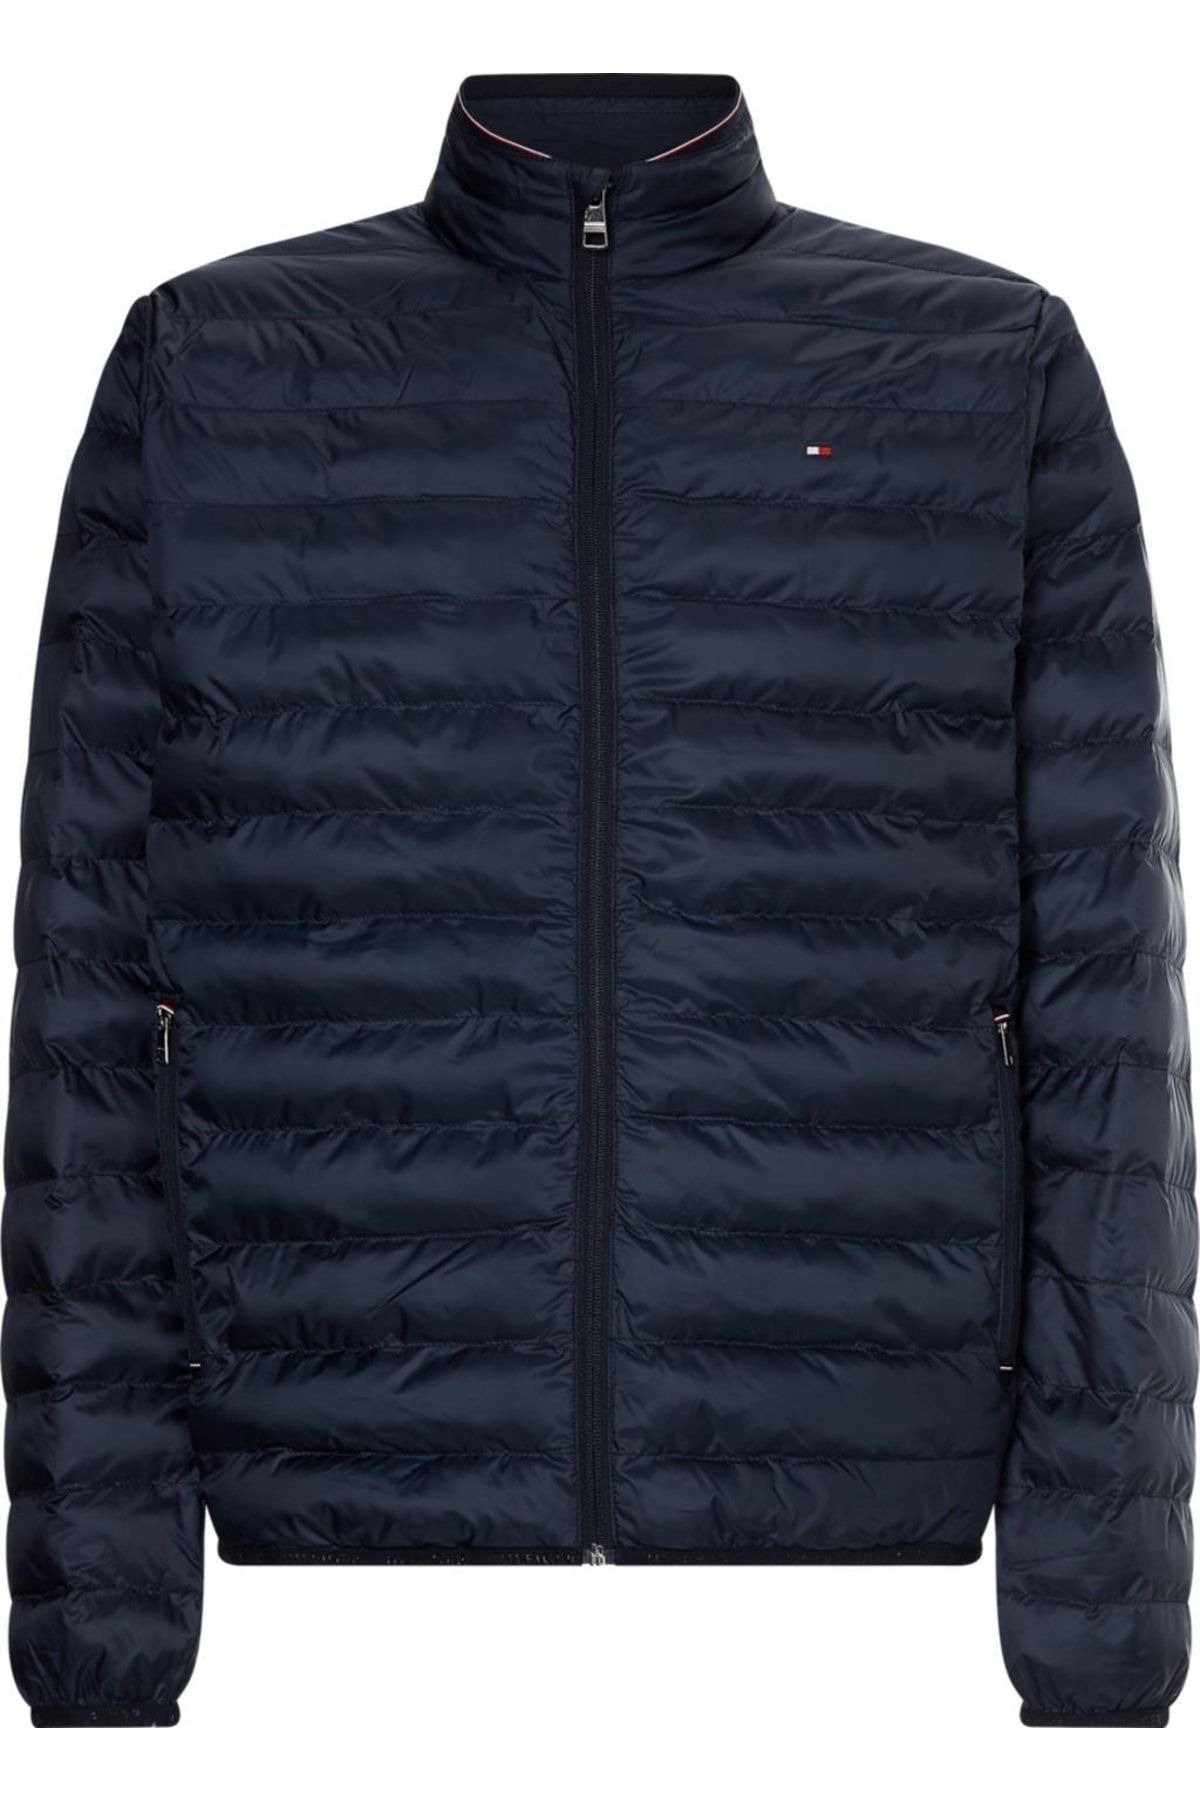 Tommy Hilfiger Core Packable Recycled Jacket